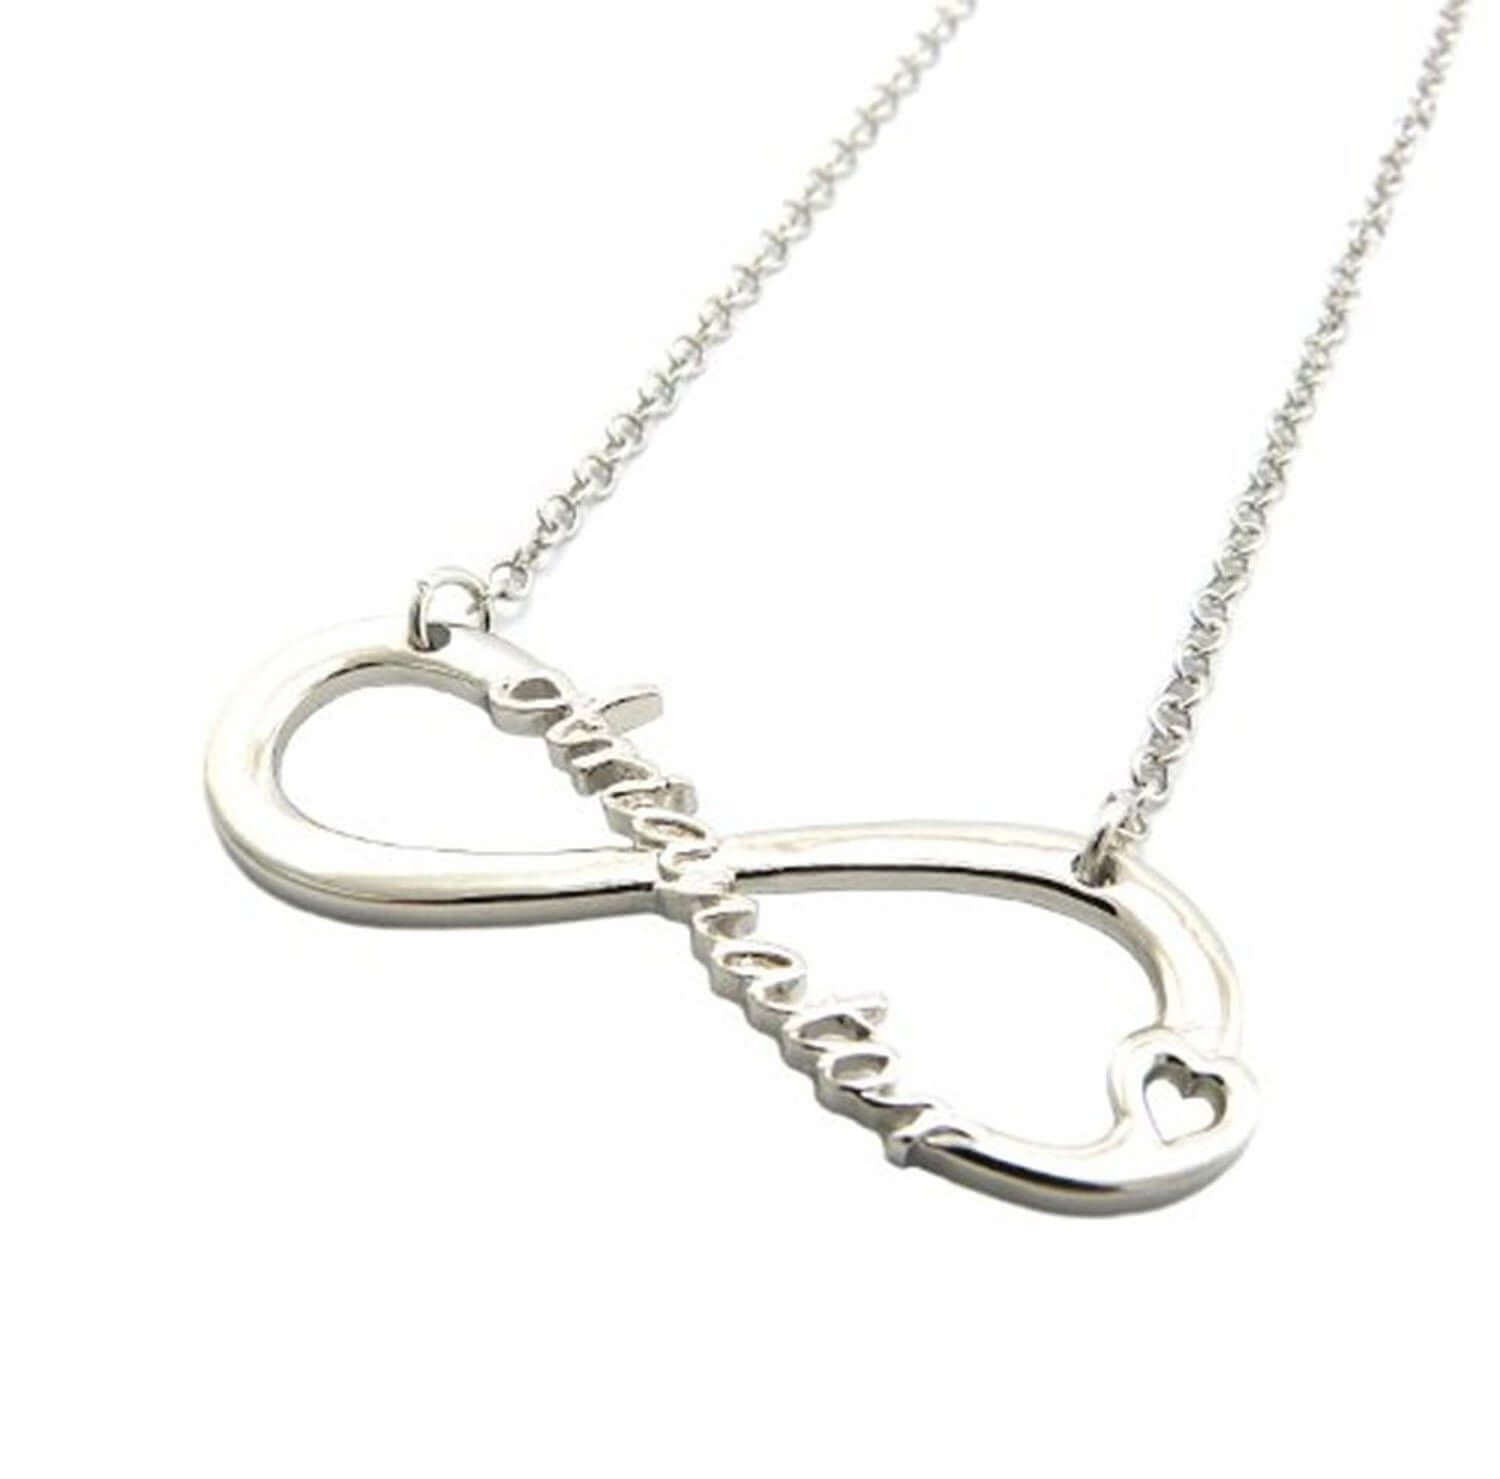 Arianator Infinity Necklace Silver Tone Pendant by Expression Tees